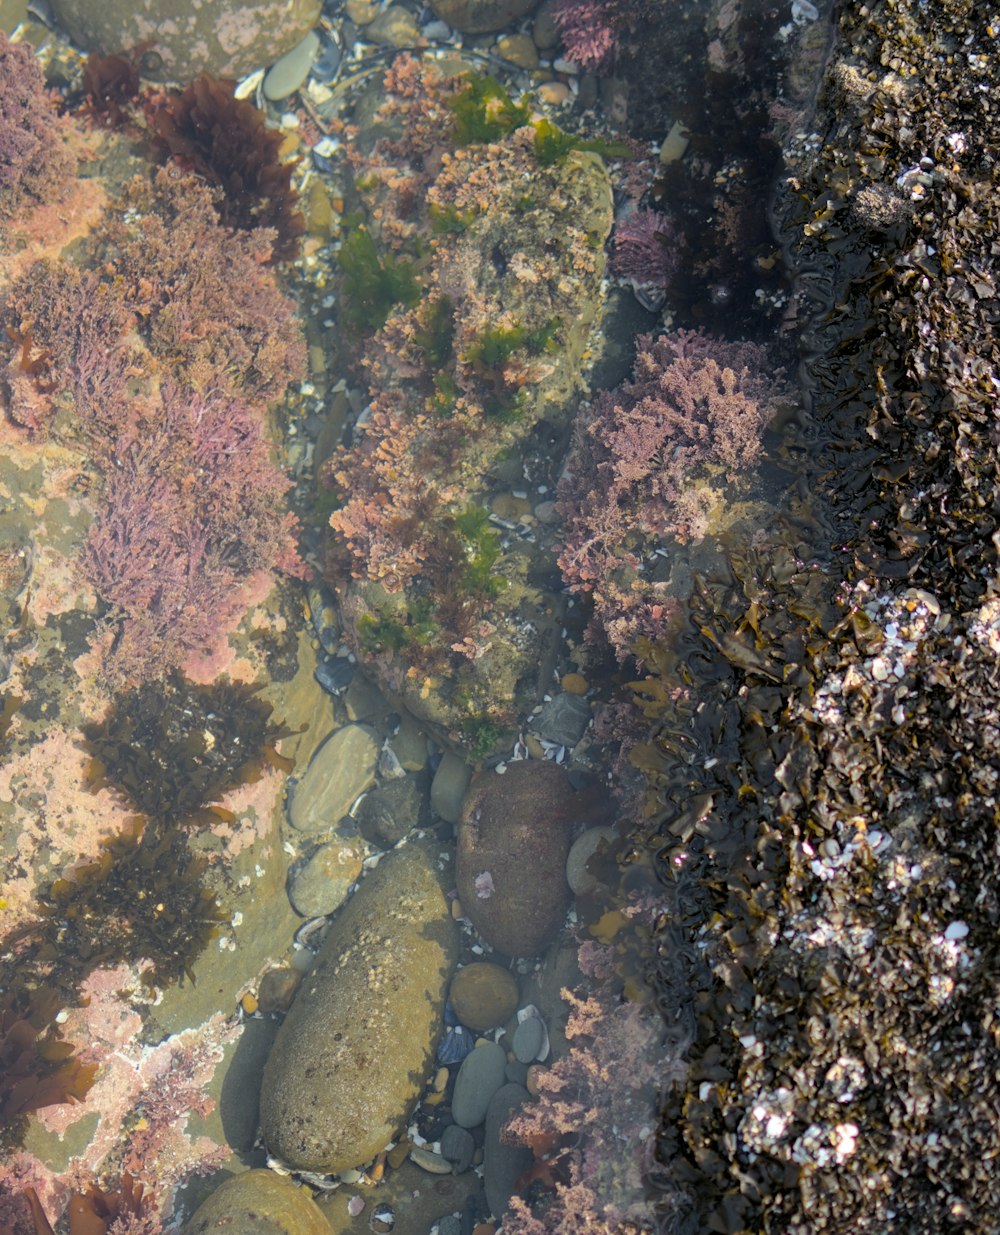 a view of the water from above of rocks and seaweed